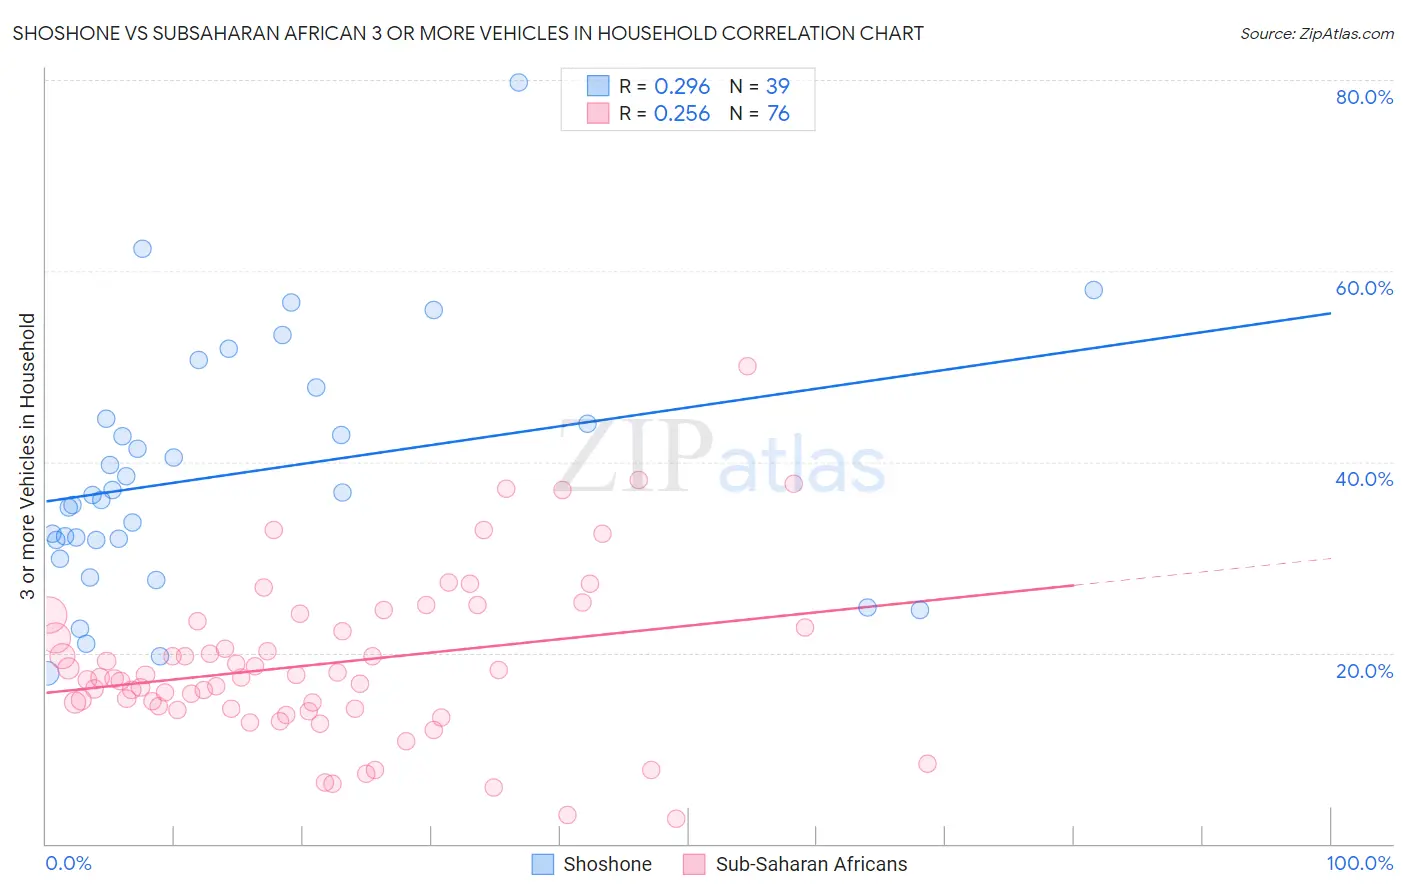 Shoshone vs Subsaharan African 3 or more Vehicles in Household